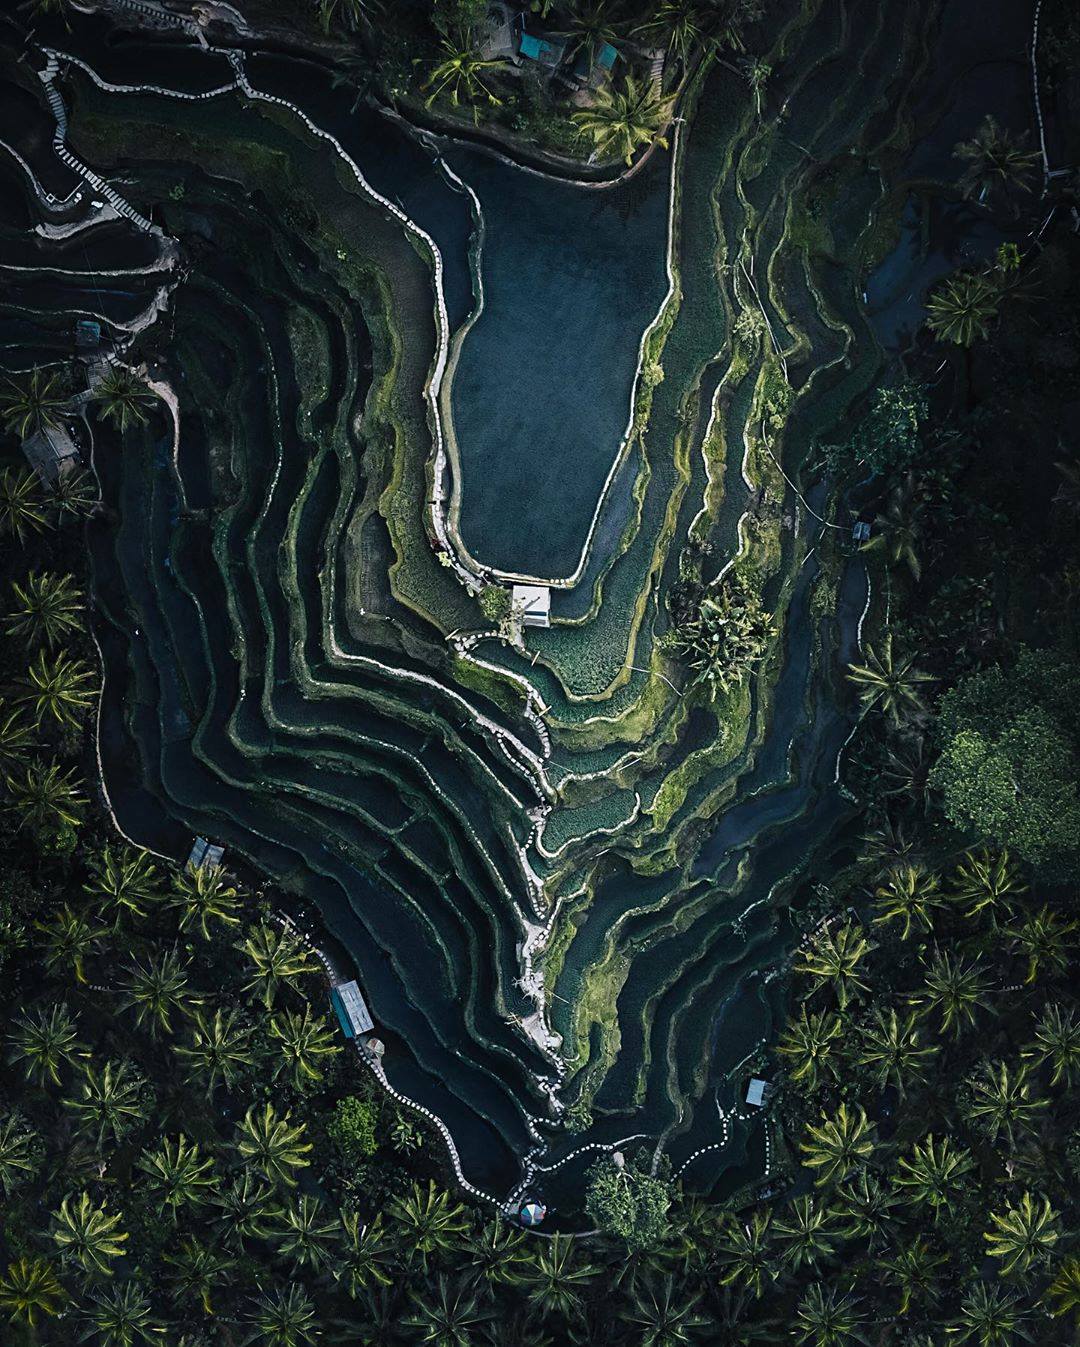 A view from above the iconic rice paddies of Bali, Indonesia. #PerfectingTheJourney